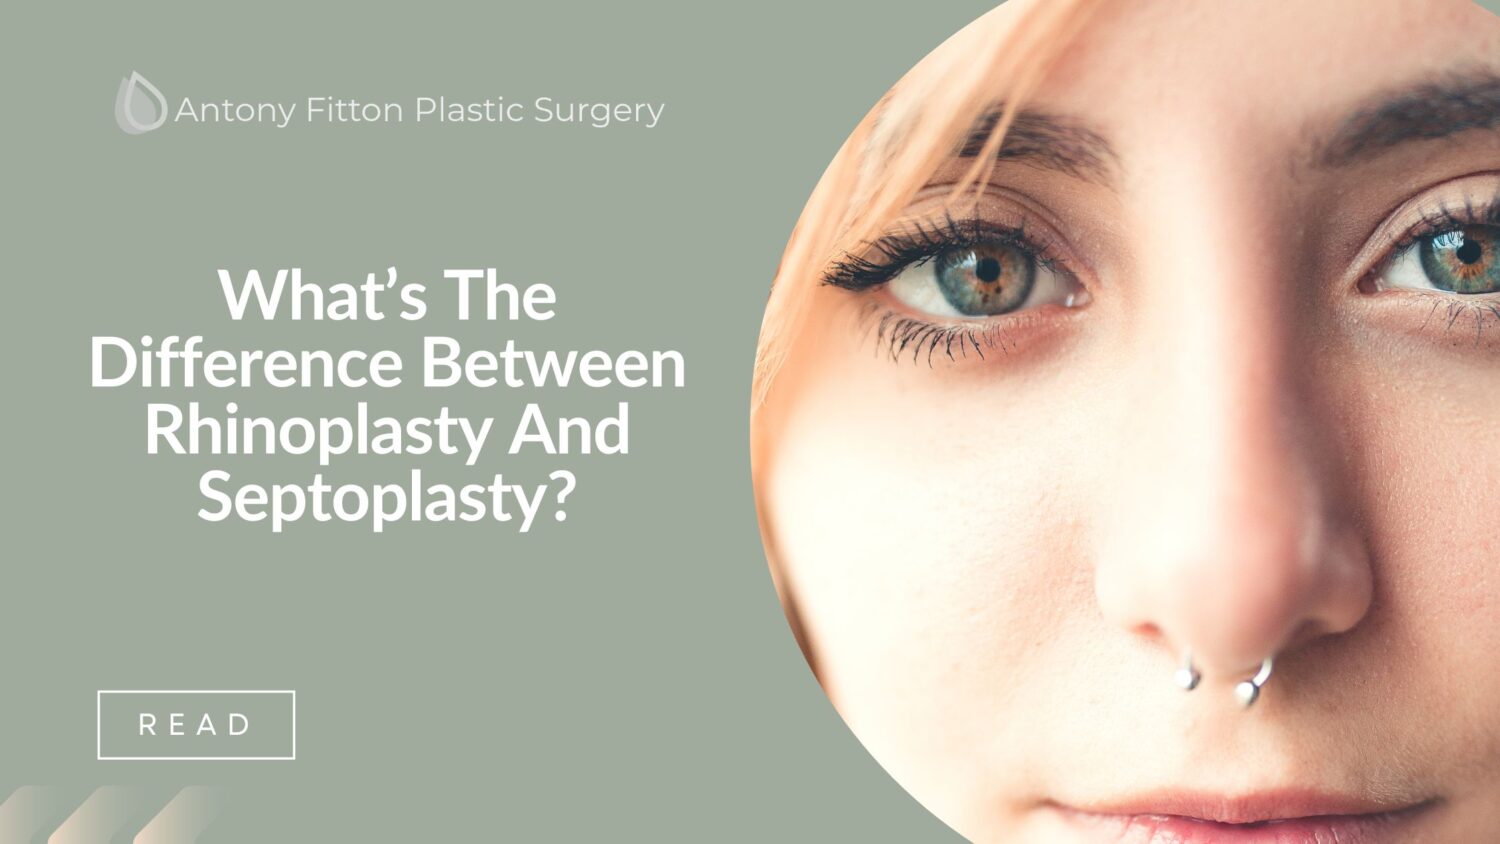 What’s The Difference Between Rhinoplasty And Septoplasty?